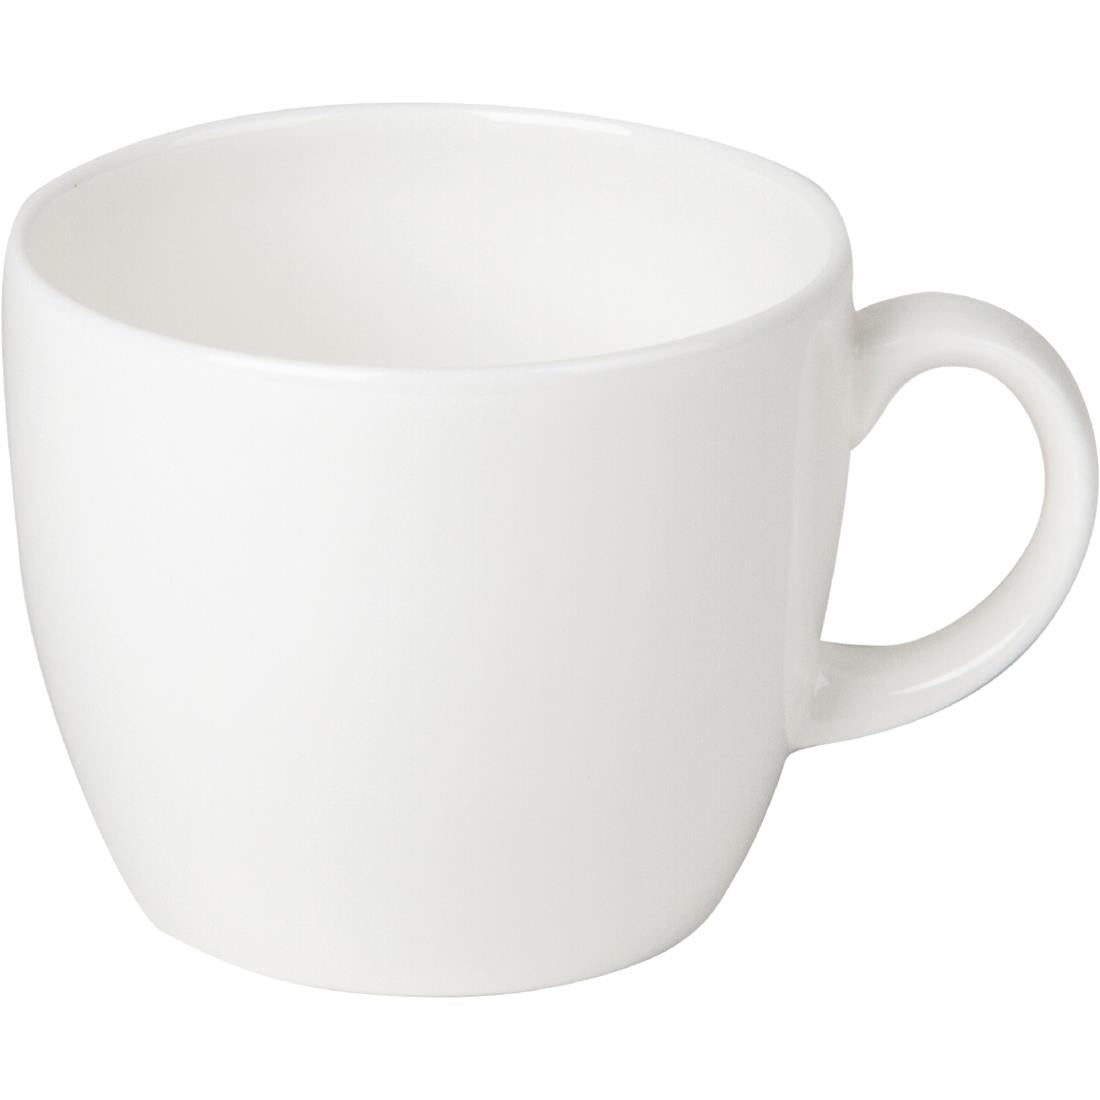 GG142 Royal Porcelain Ascot Coffee Cups 200ml (Pack of 6) JD Catering Equipment Solutions Ltd